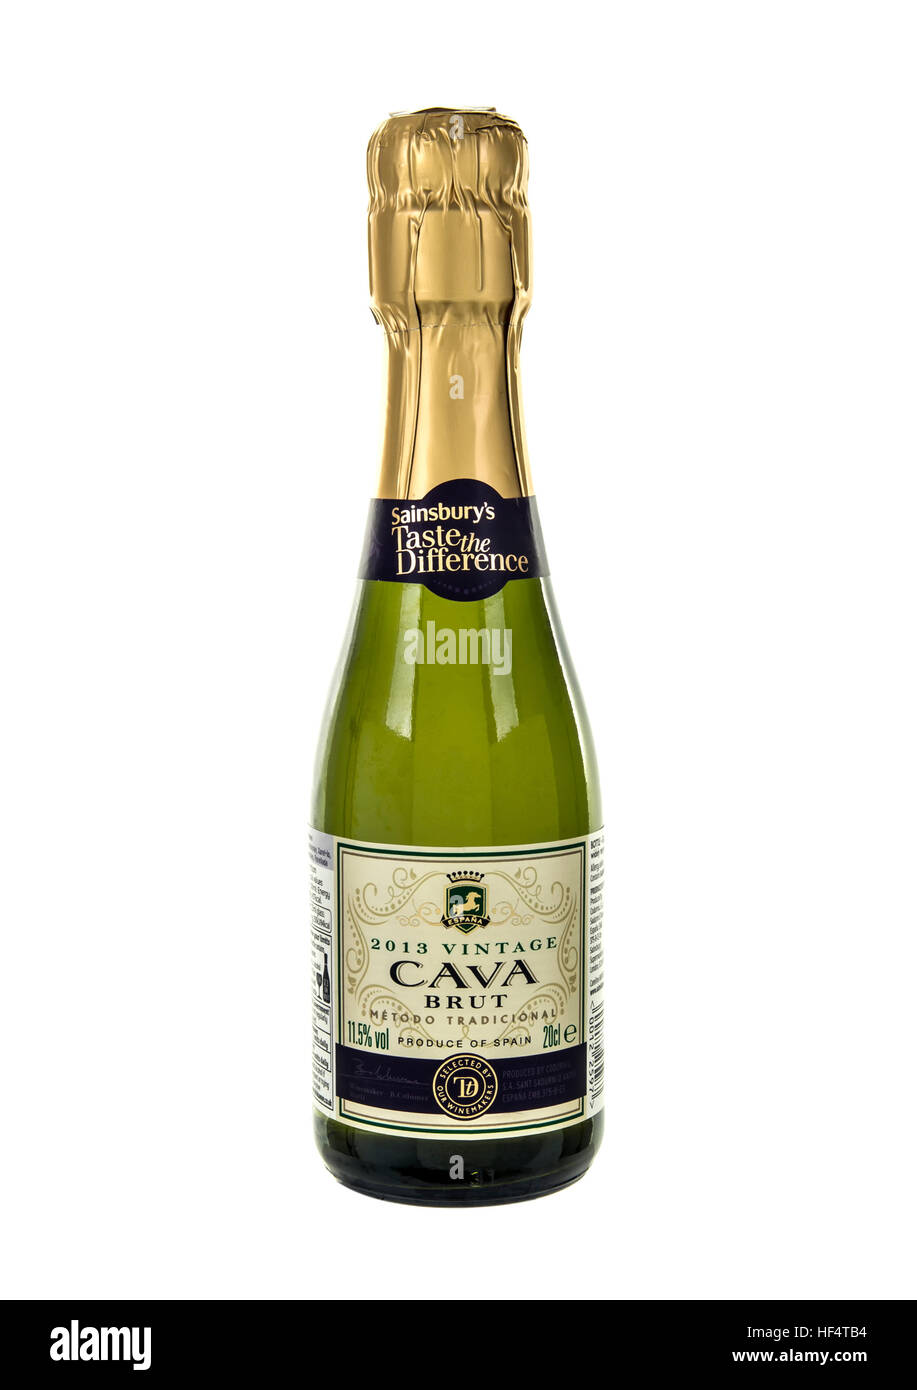 Bottle of Sainsburys Taste the Difference Brut Cava on a white background Stock Photo